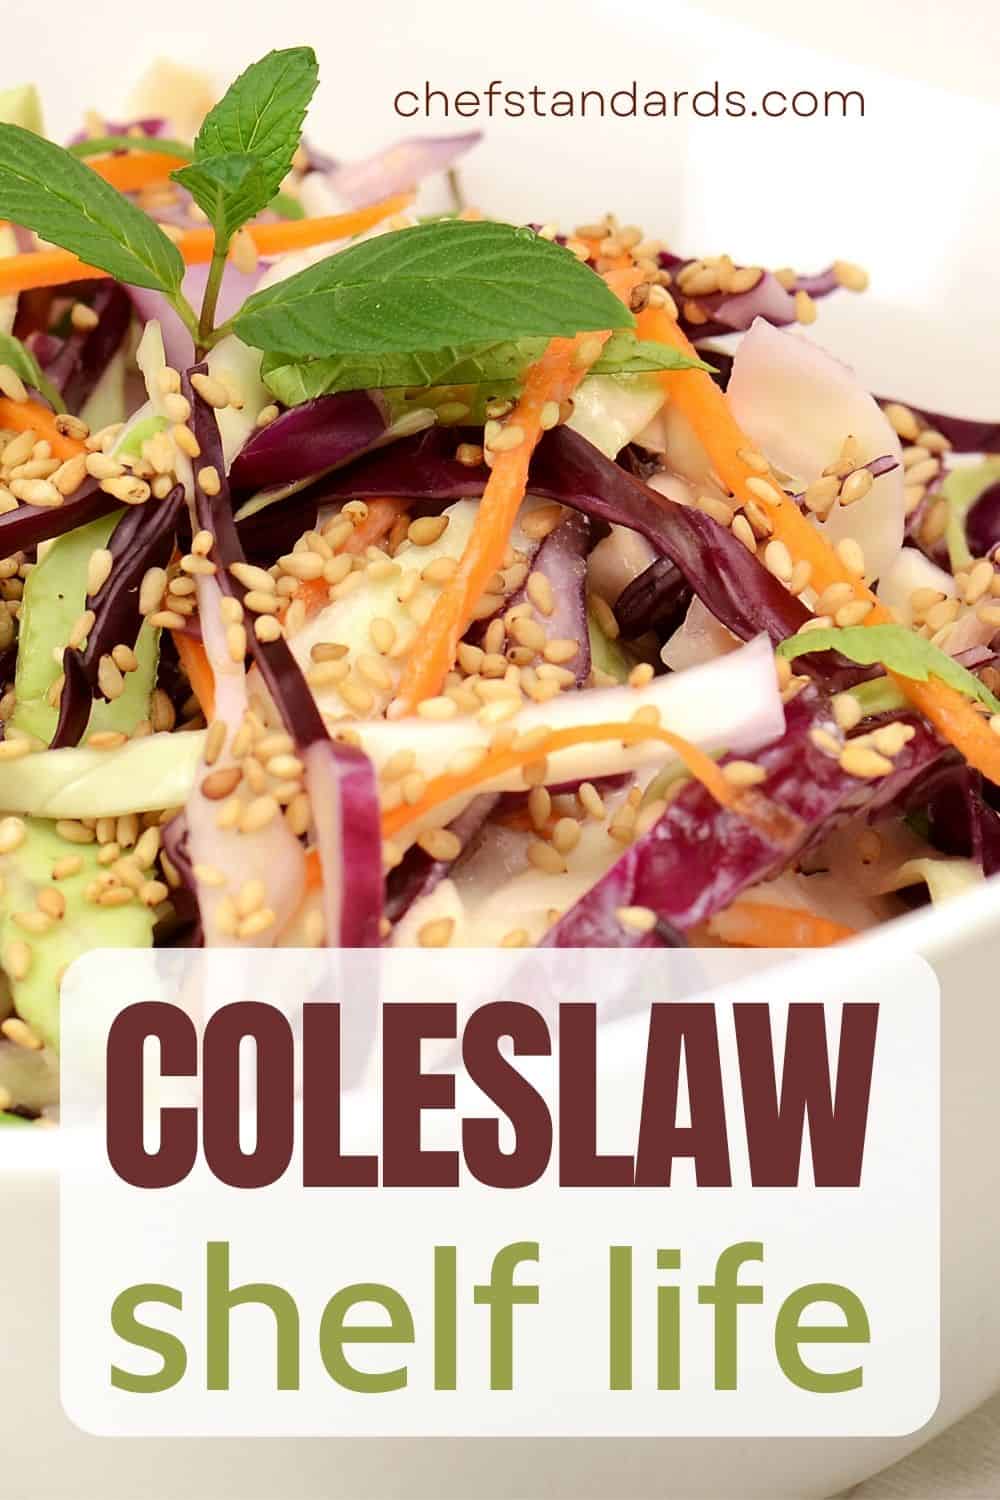 How Long Is Coleslaw Good For And How To Store It Properly?